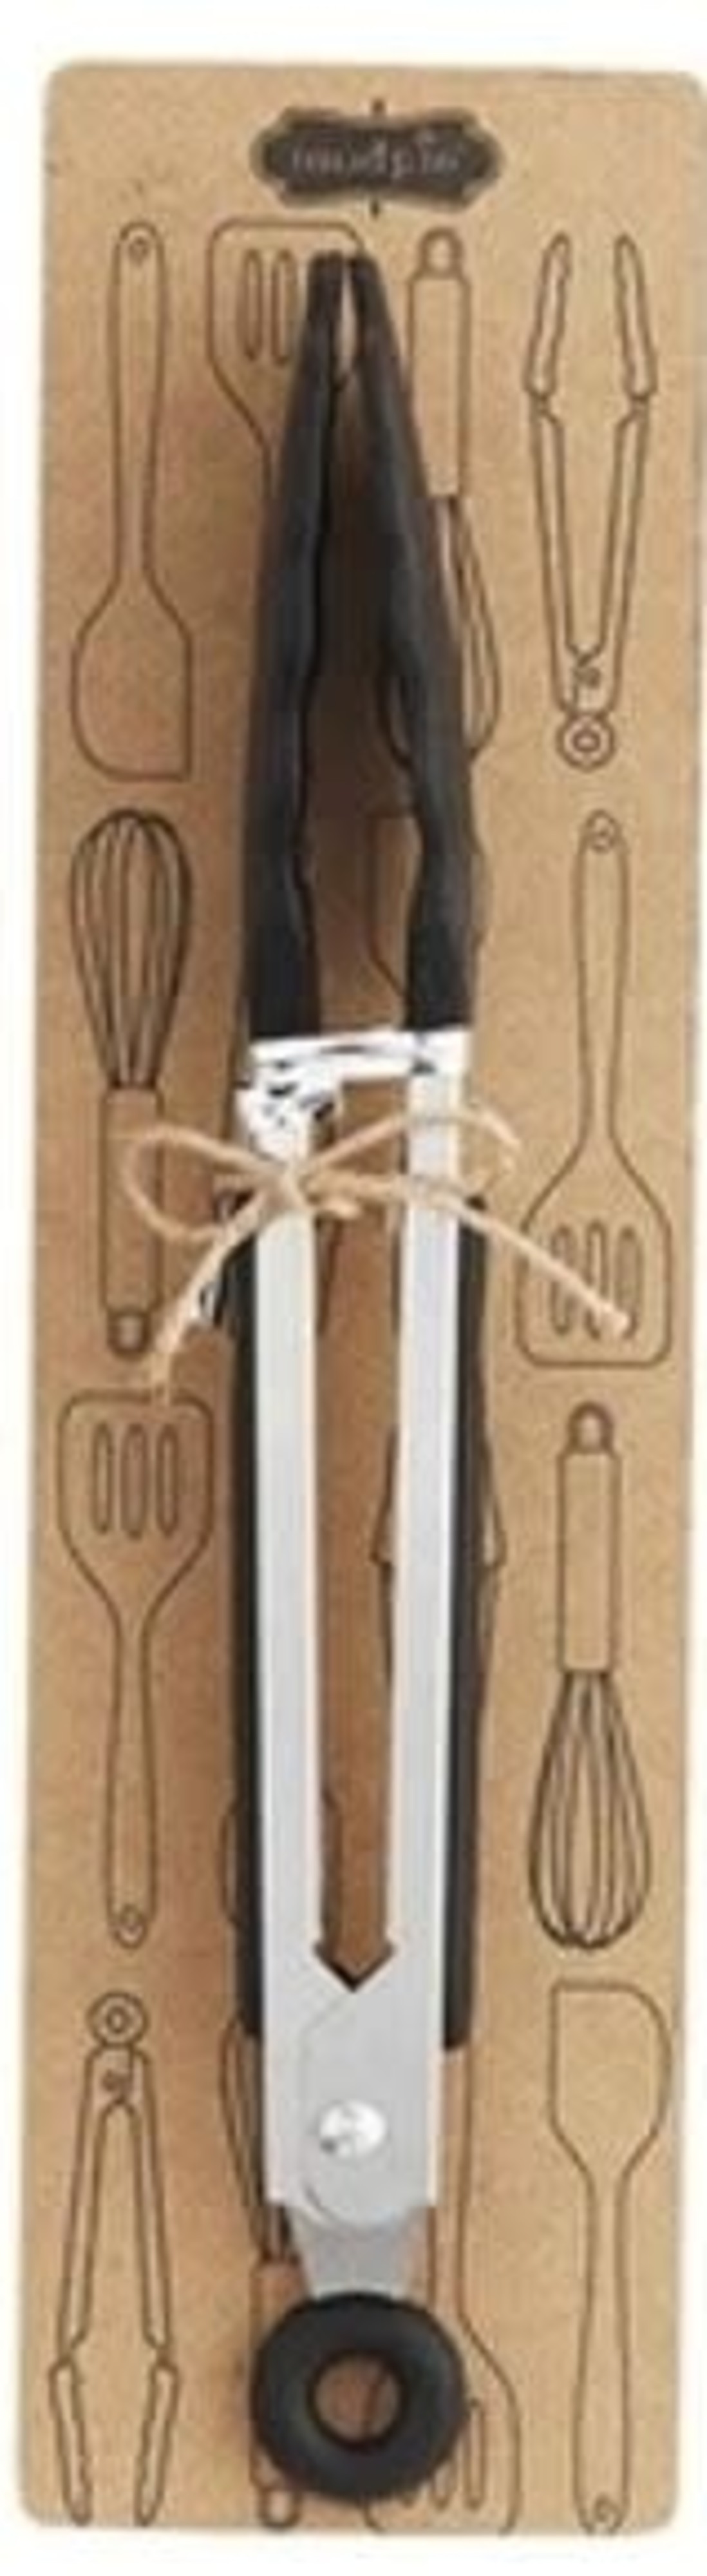 Mud Pie Slotted Spatula Mini Kitchen Utensil 8 inch - Digs N Gifts